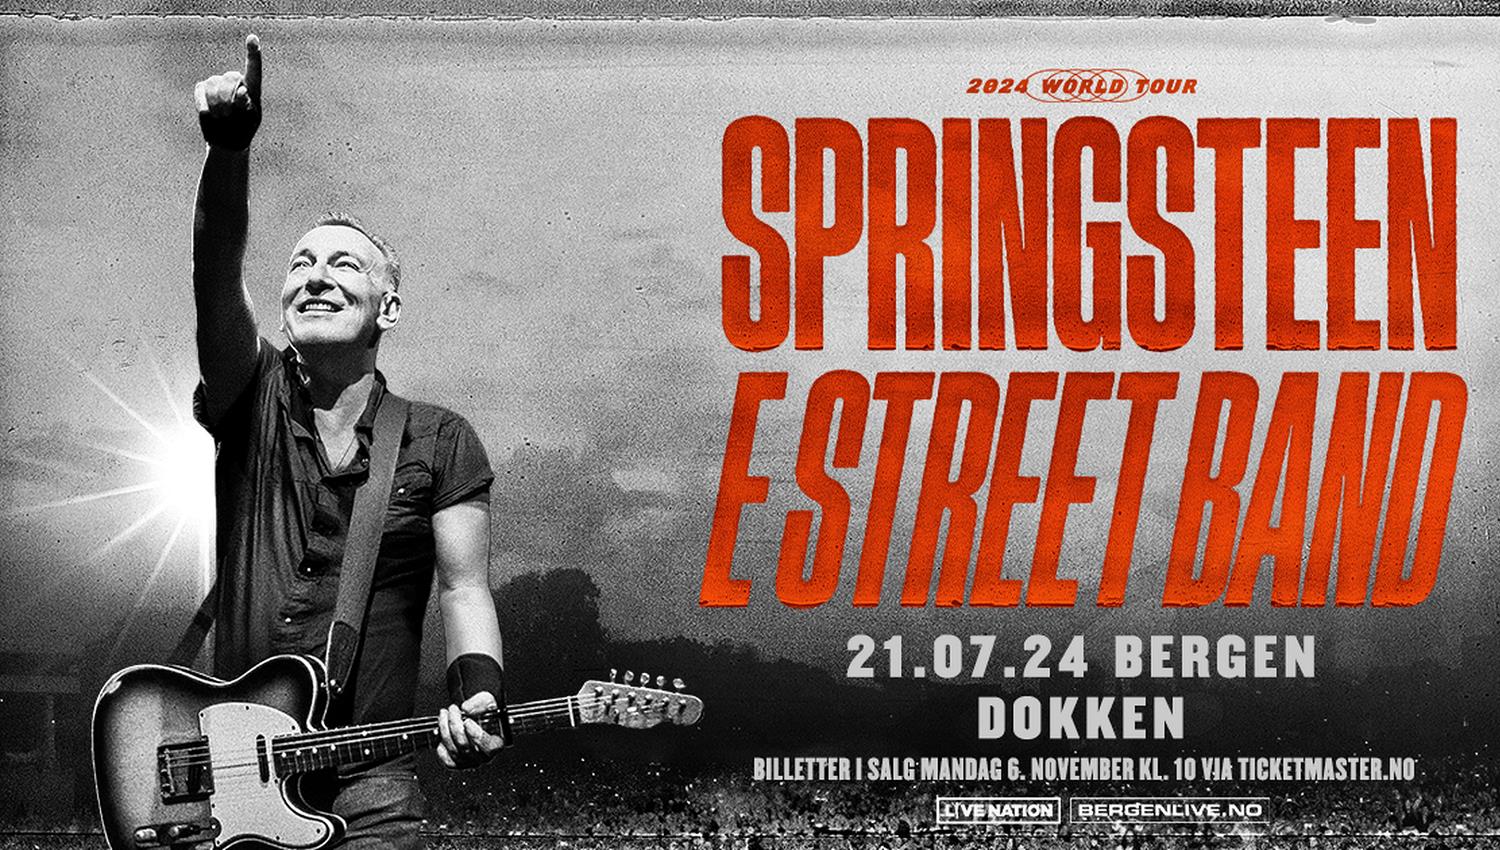 Bruce Springsteen and The E Street Band 2024 World Tour Fjord Norway